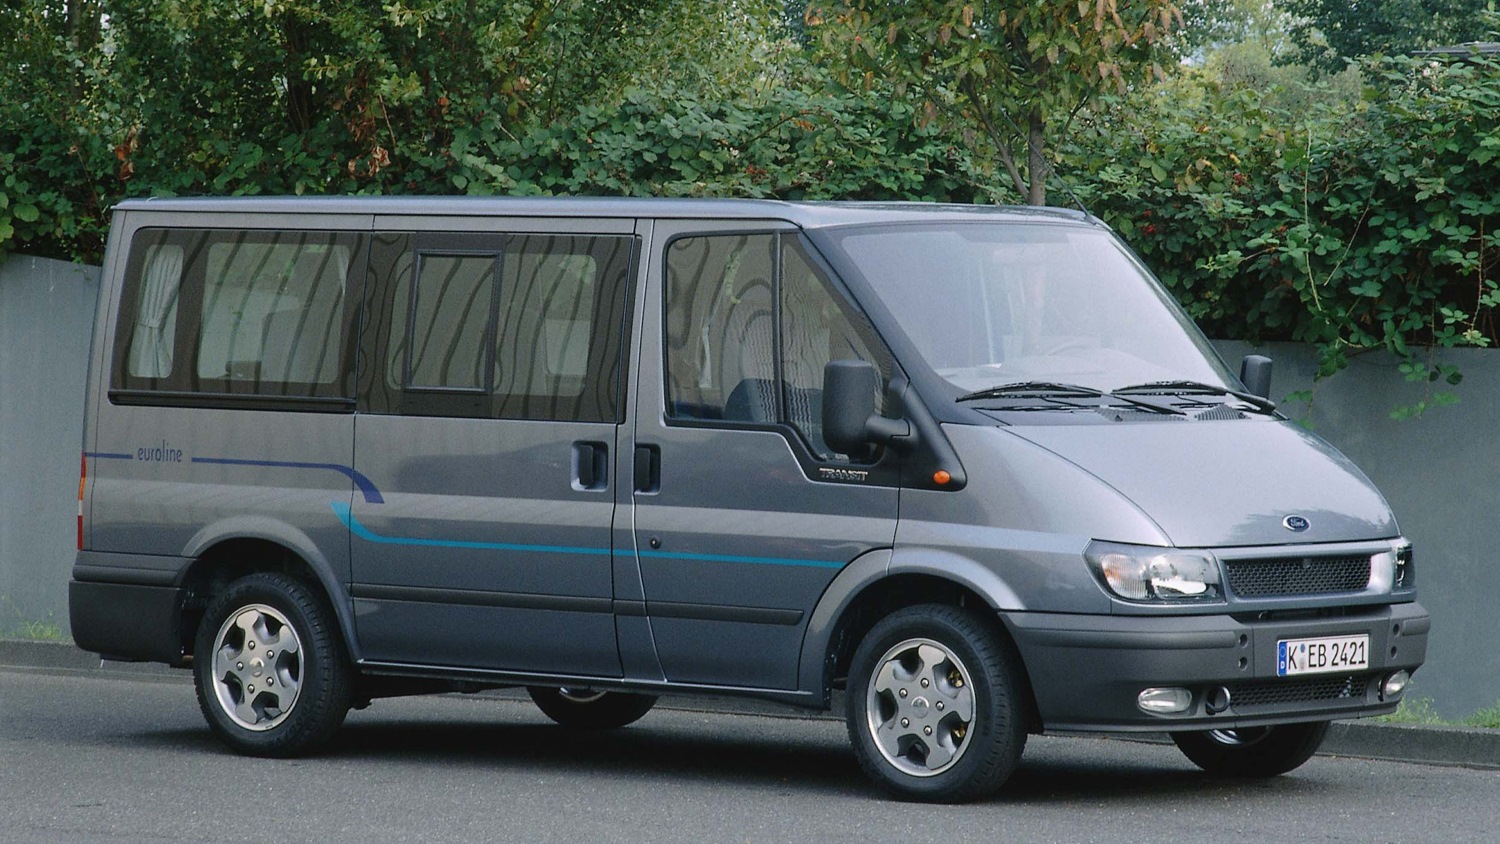 Ford Transit 2000. Ford Транзит 2000. Ford Transit 2002. Ford Transit 06. Купить форд транзит 2000 года